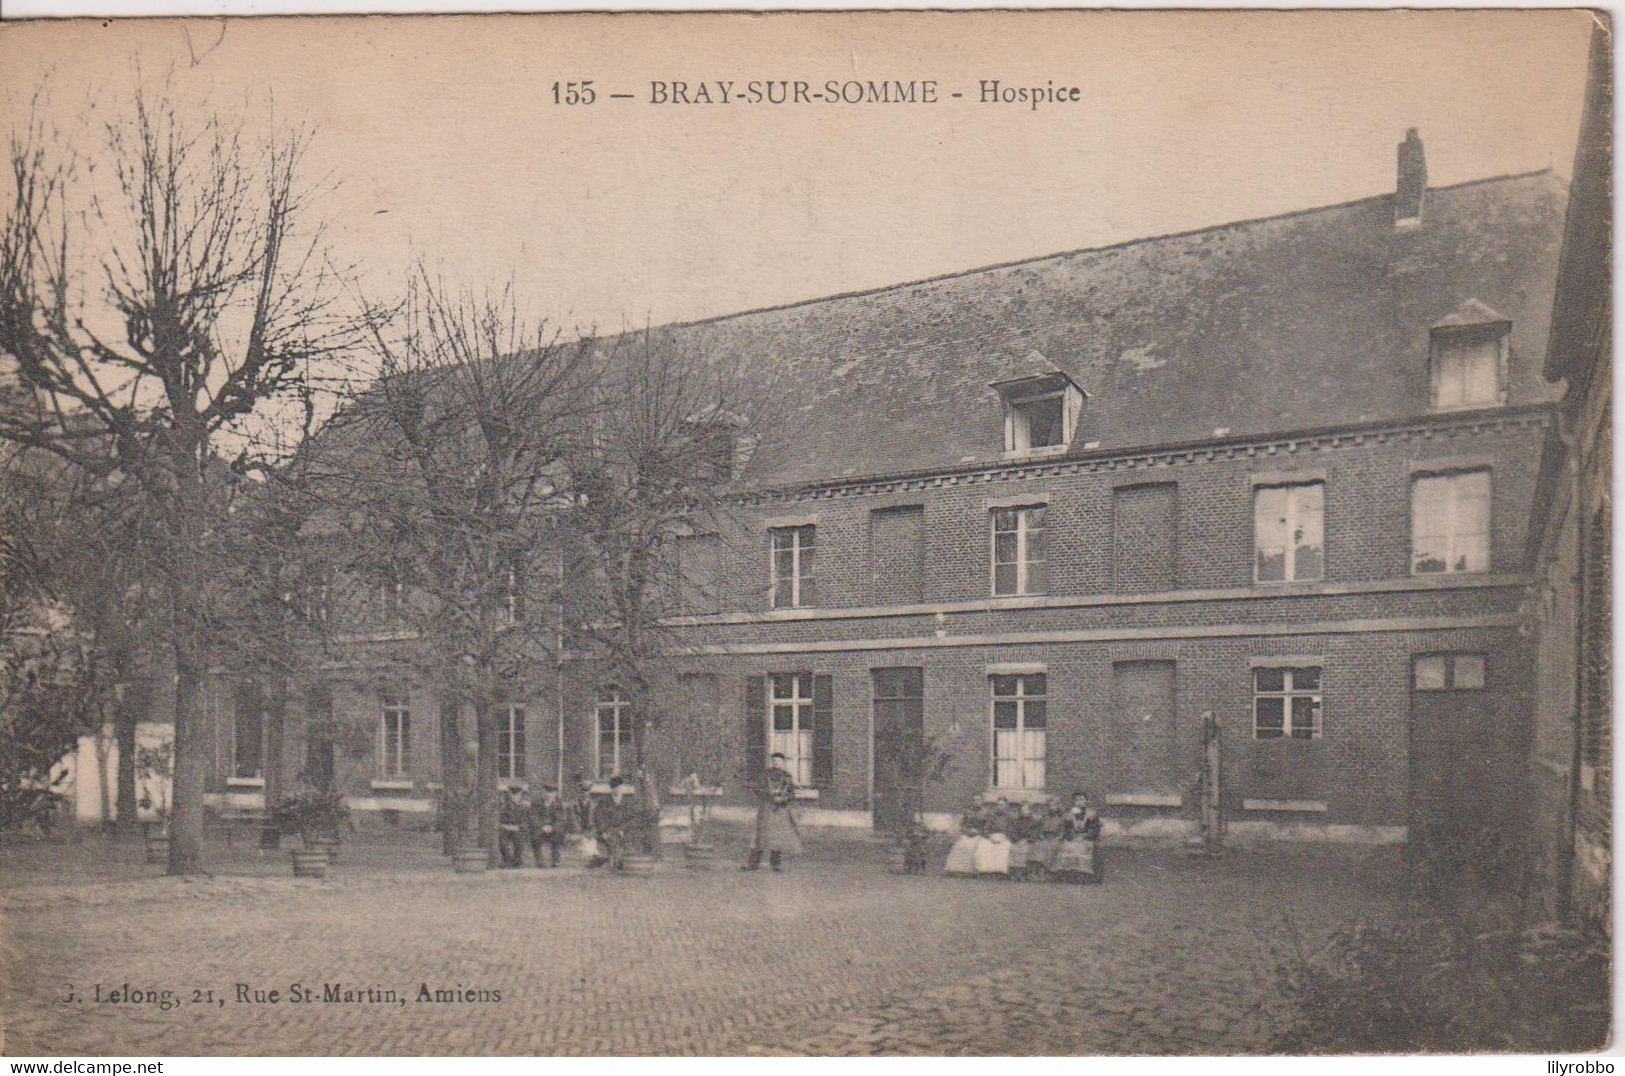 FRANCE - BRAy-SUR-SOMME - Hospice - Good Animation Etc - Bray Sur Somme